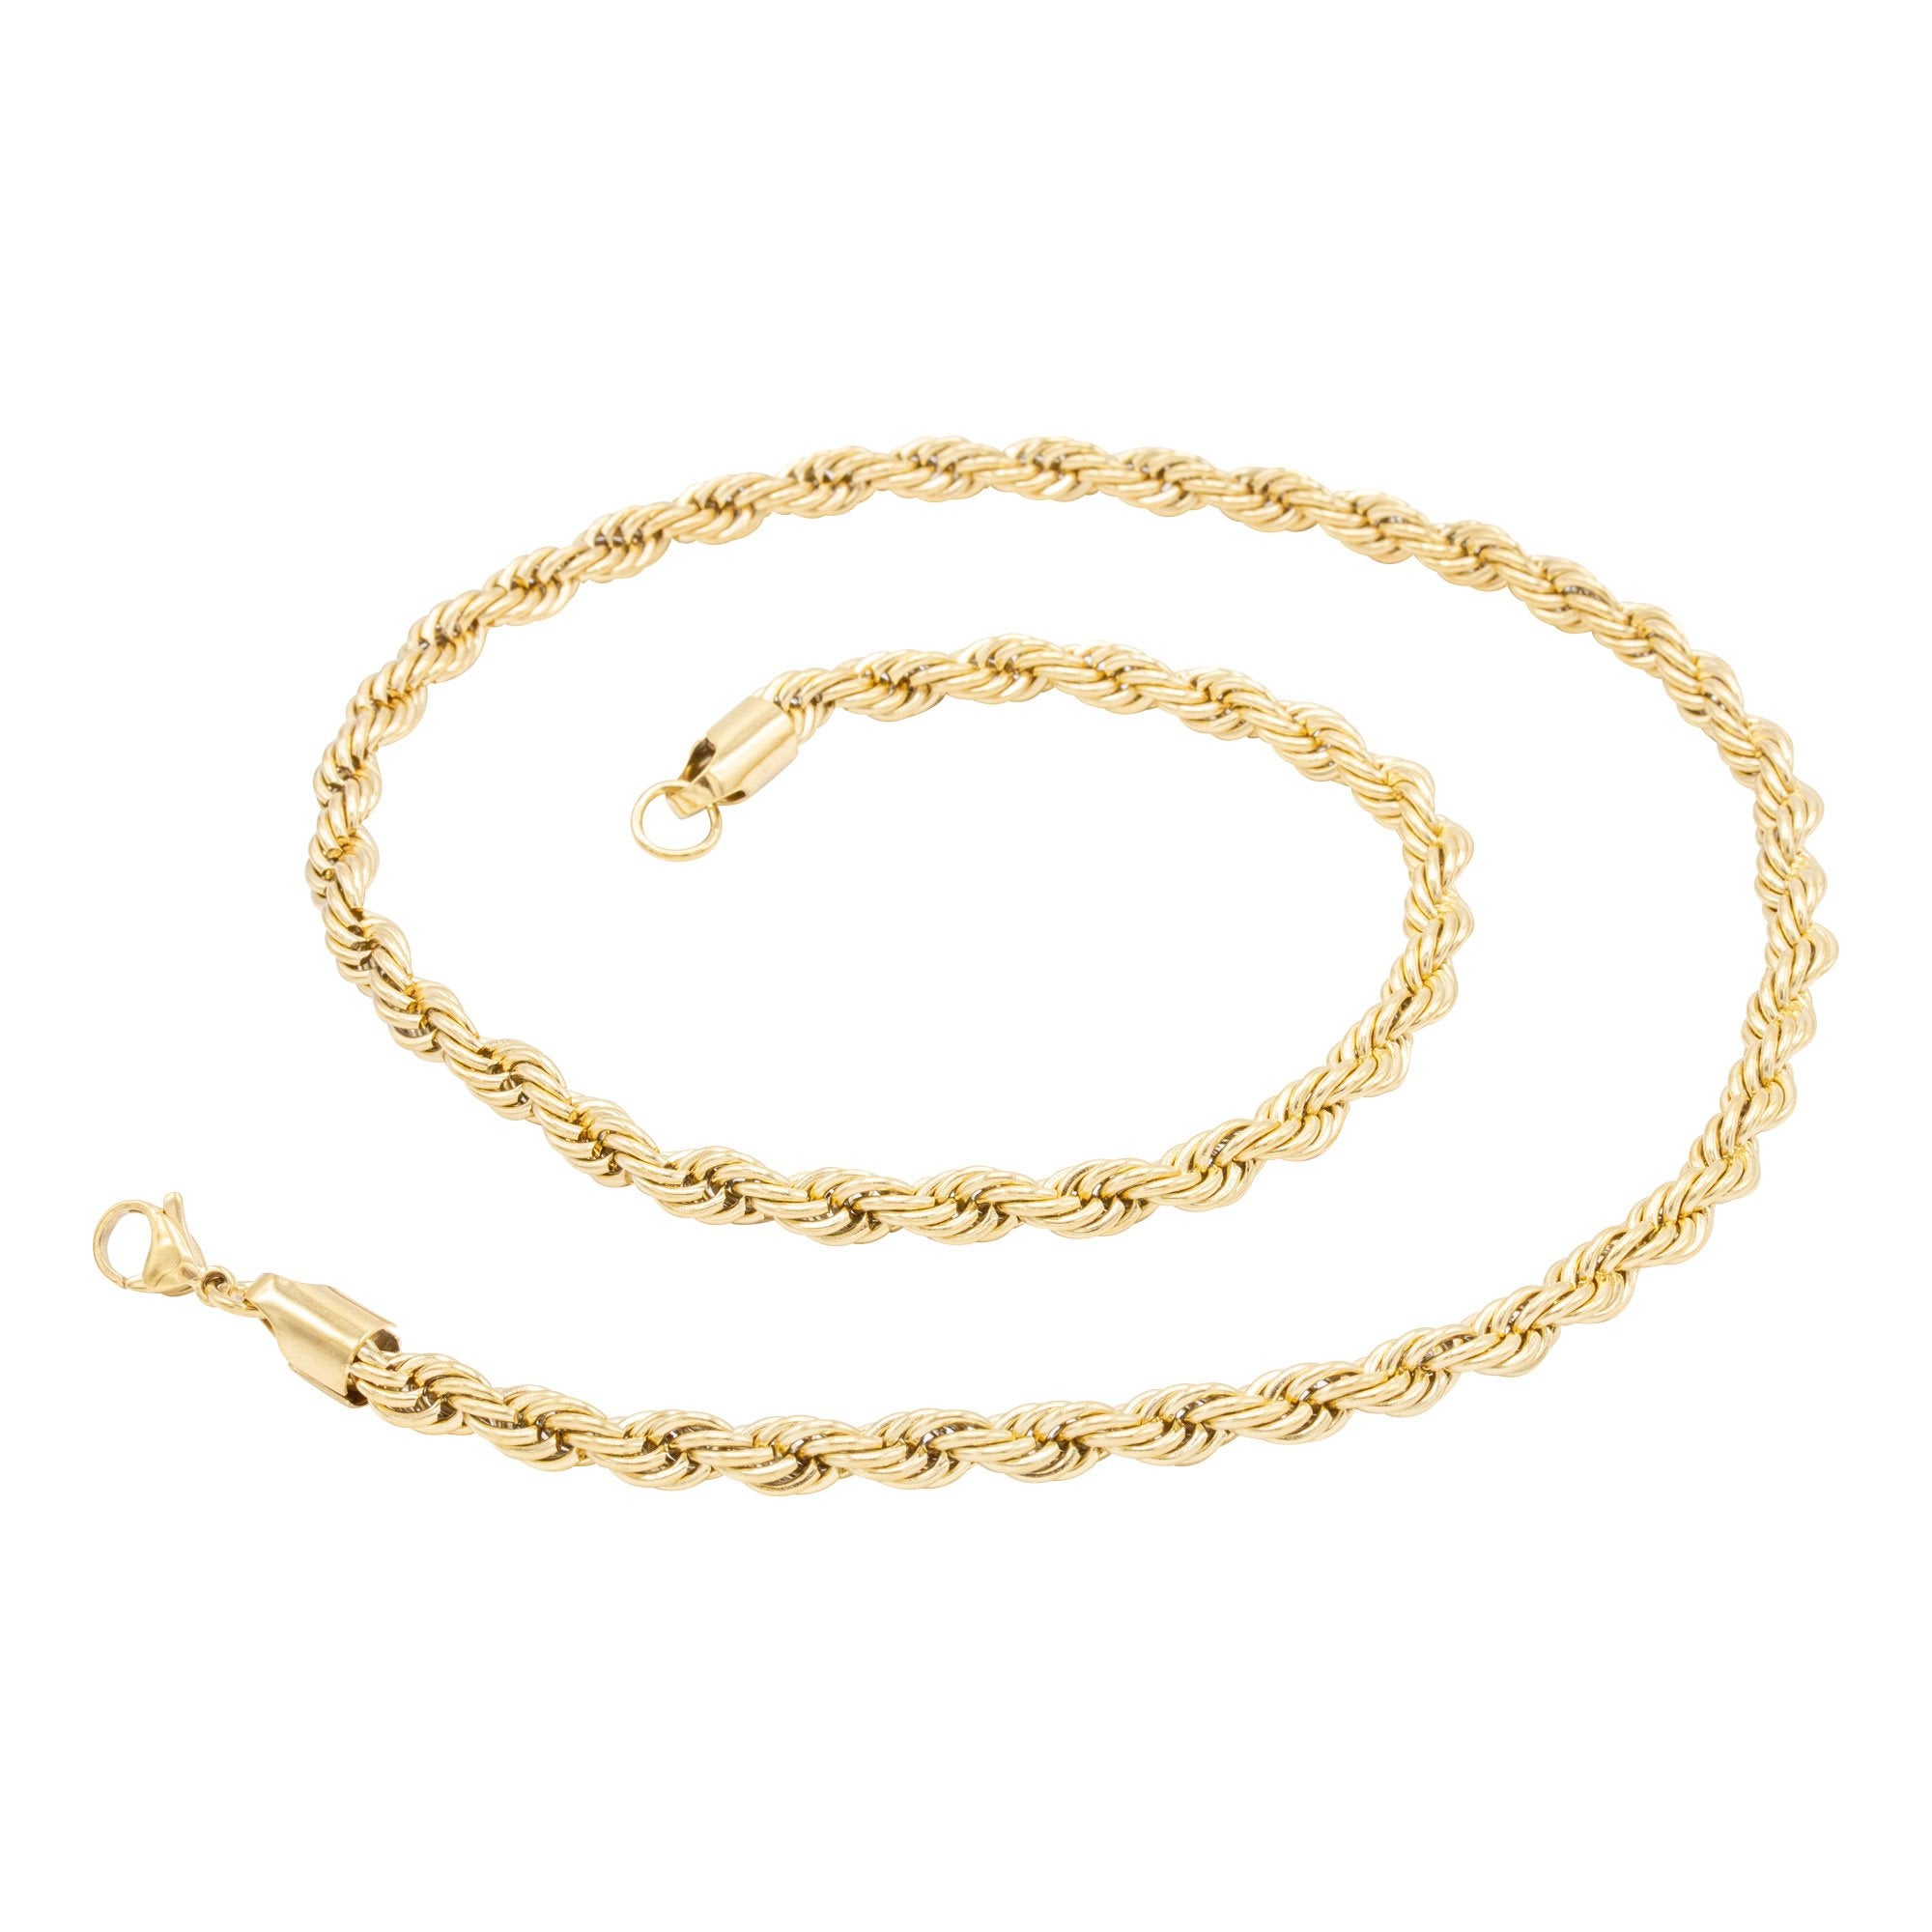 14K Gold Plated Rope Chain Twisted Link Necklace for Men 18 20 24 3 – JB  Jewelry BLVD